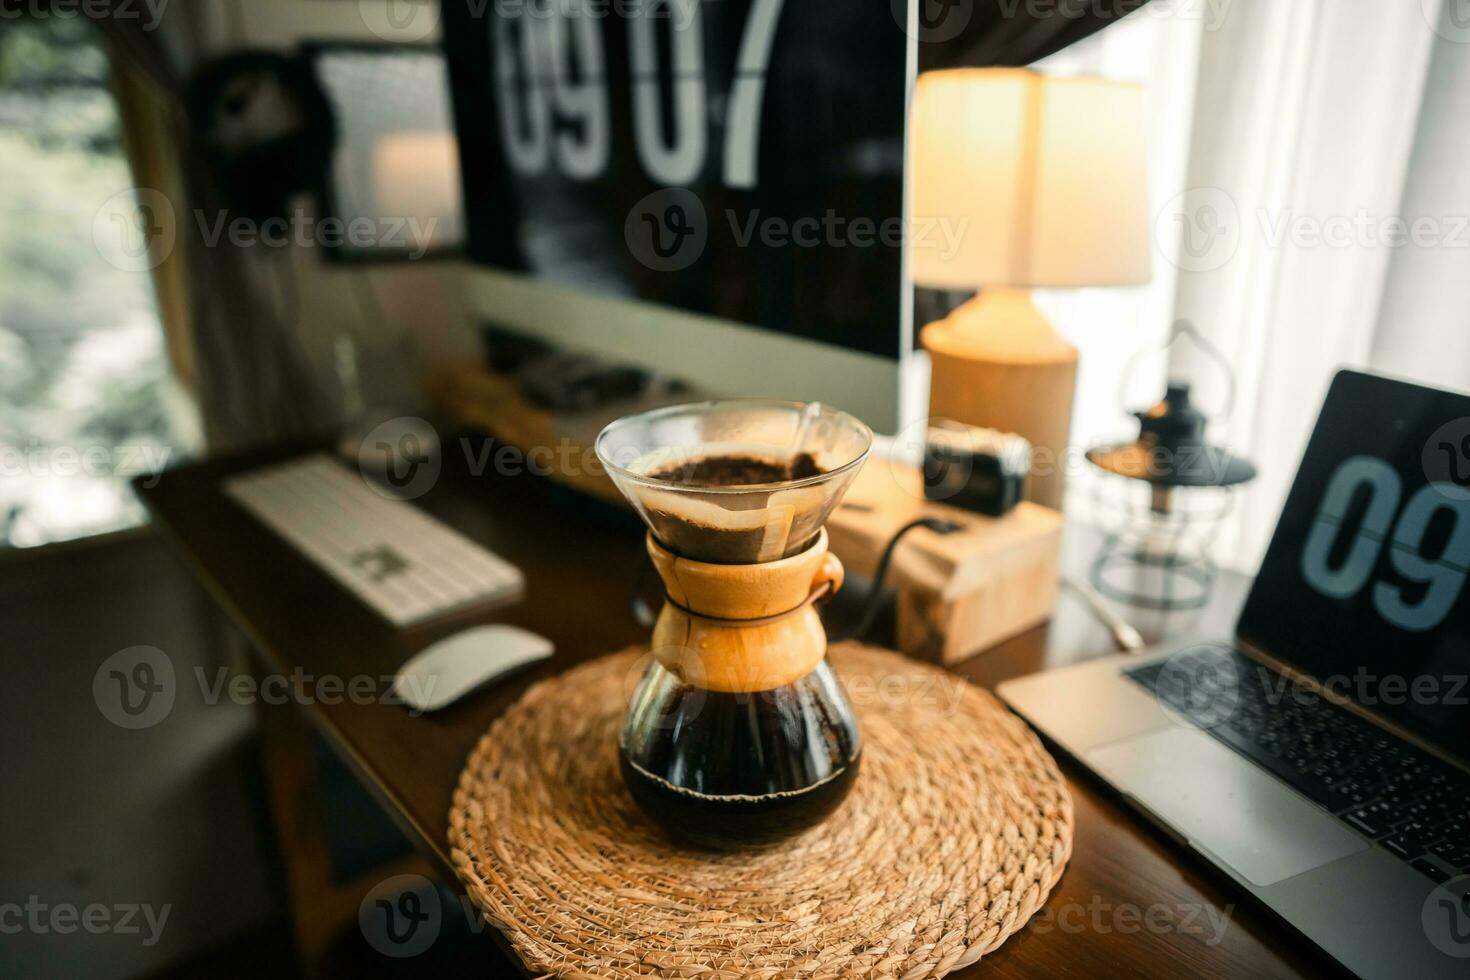 Drip coffee on the table in the house photo